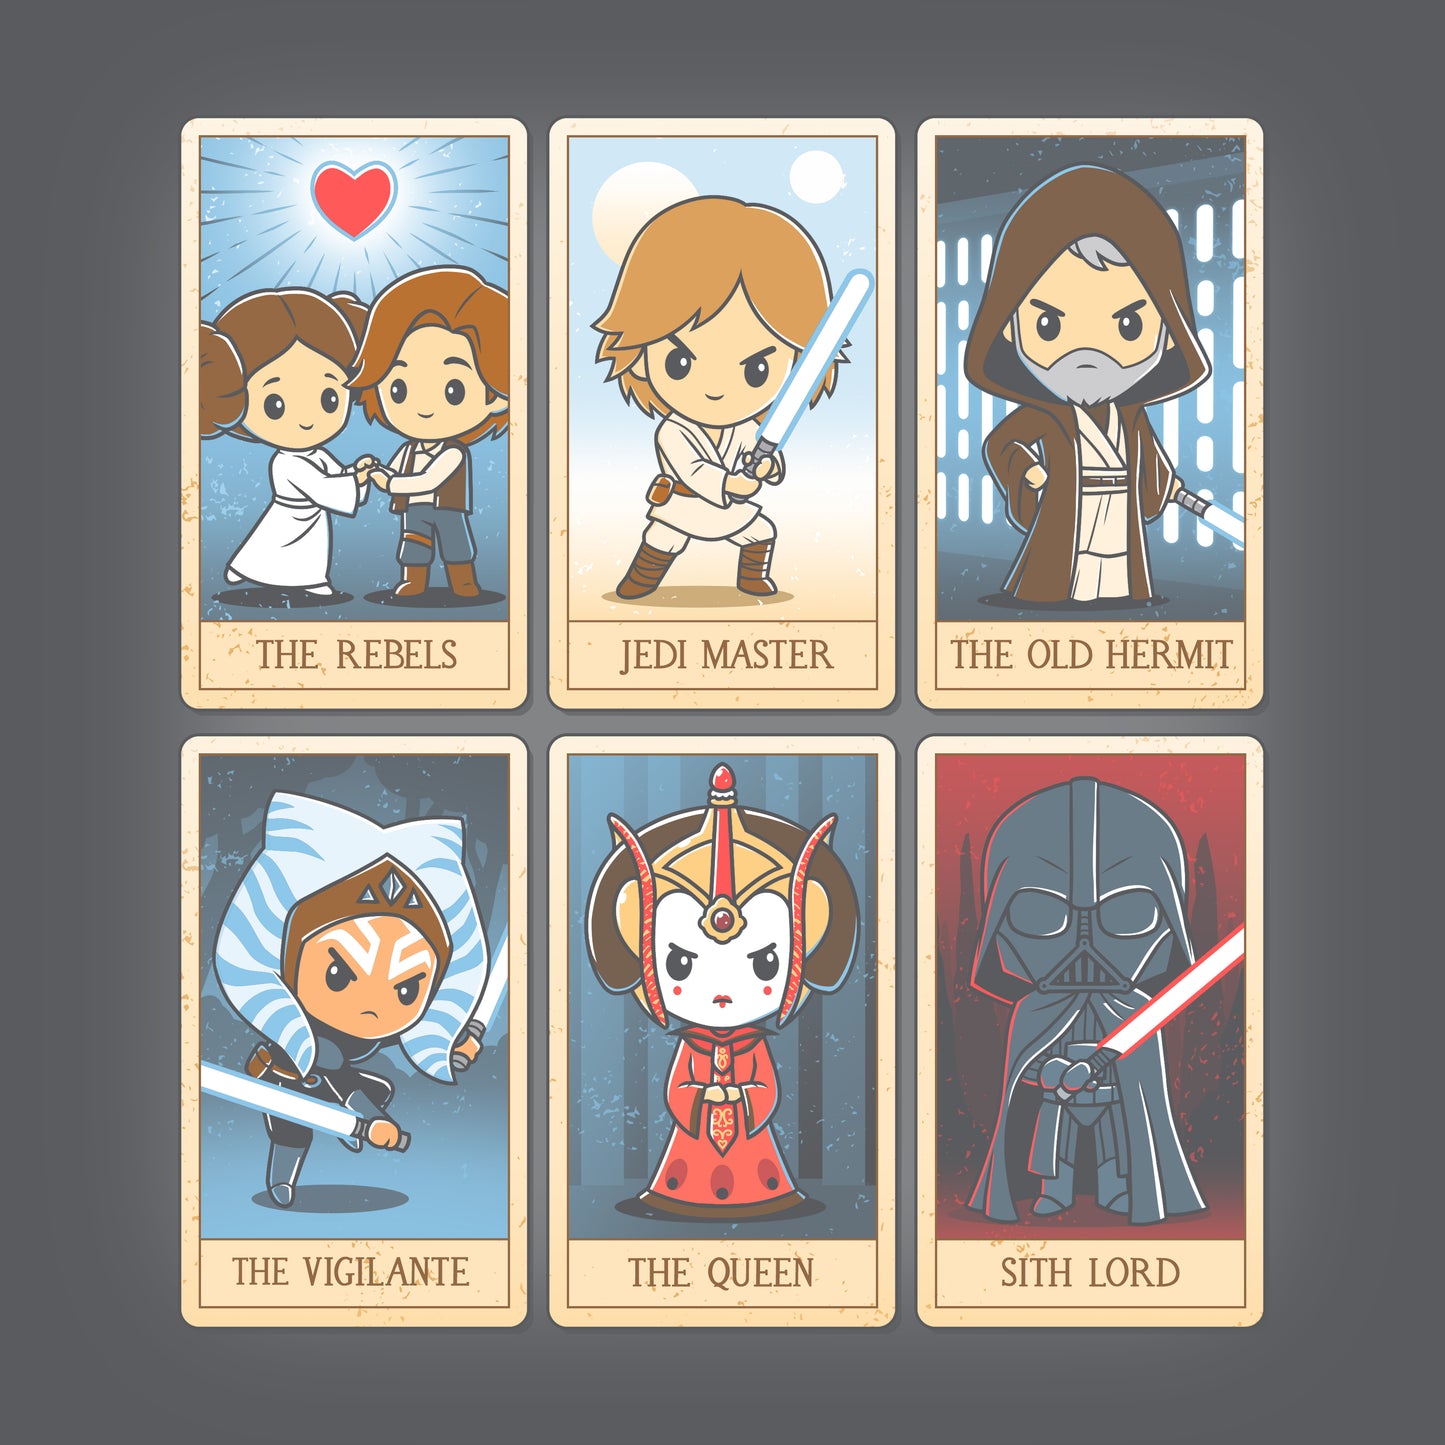 An officially licensed Star Wars Tarot Cards deck inspired by Star Wars. Embrace the wisdom of the Jedi through these unique Star Wars tarot cards.